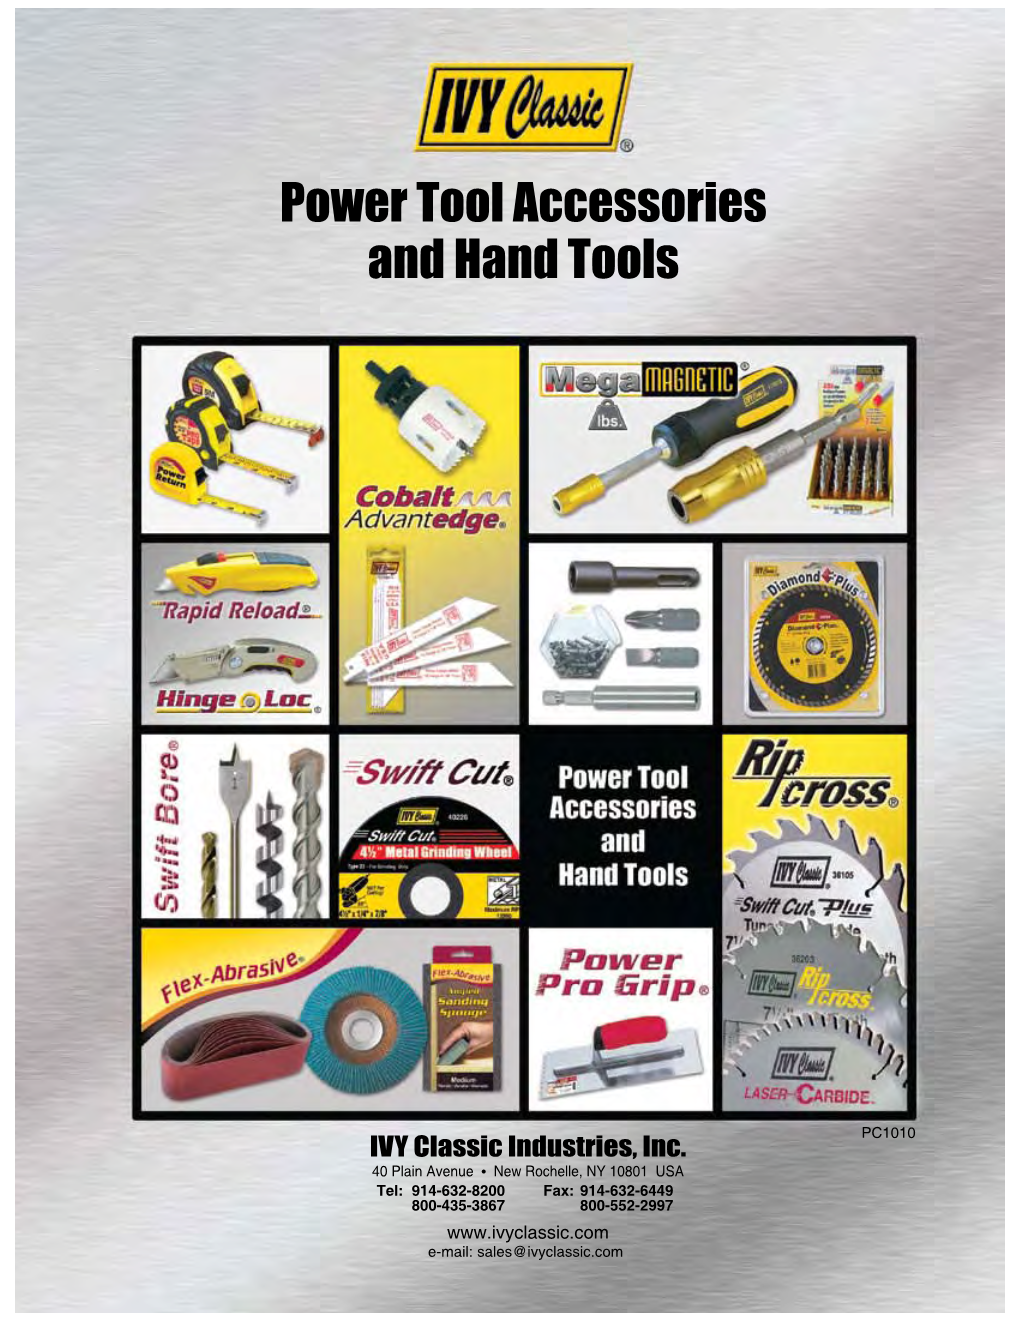 Power Tool Accessories and Hand Tools